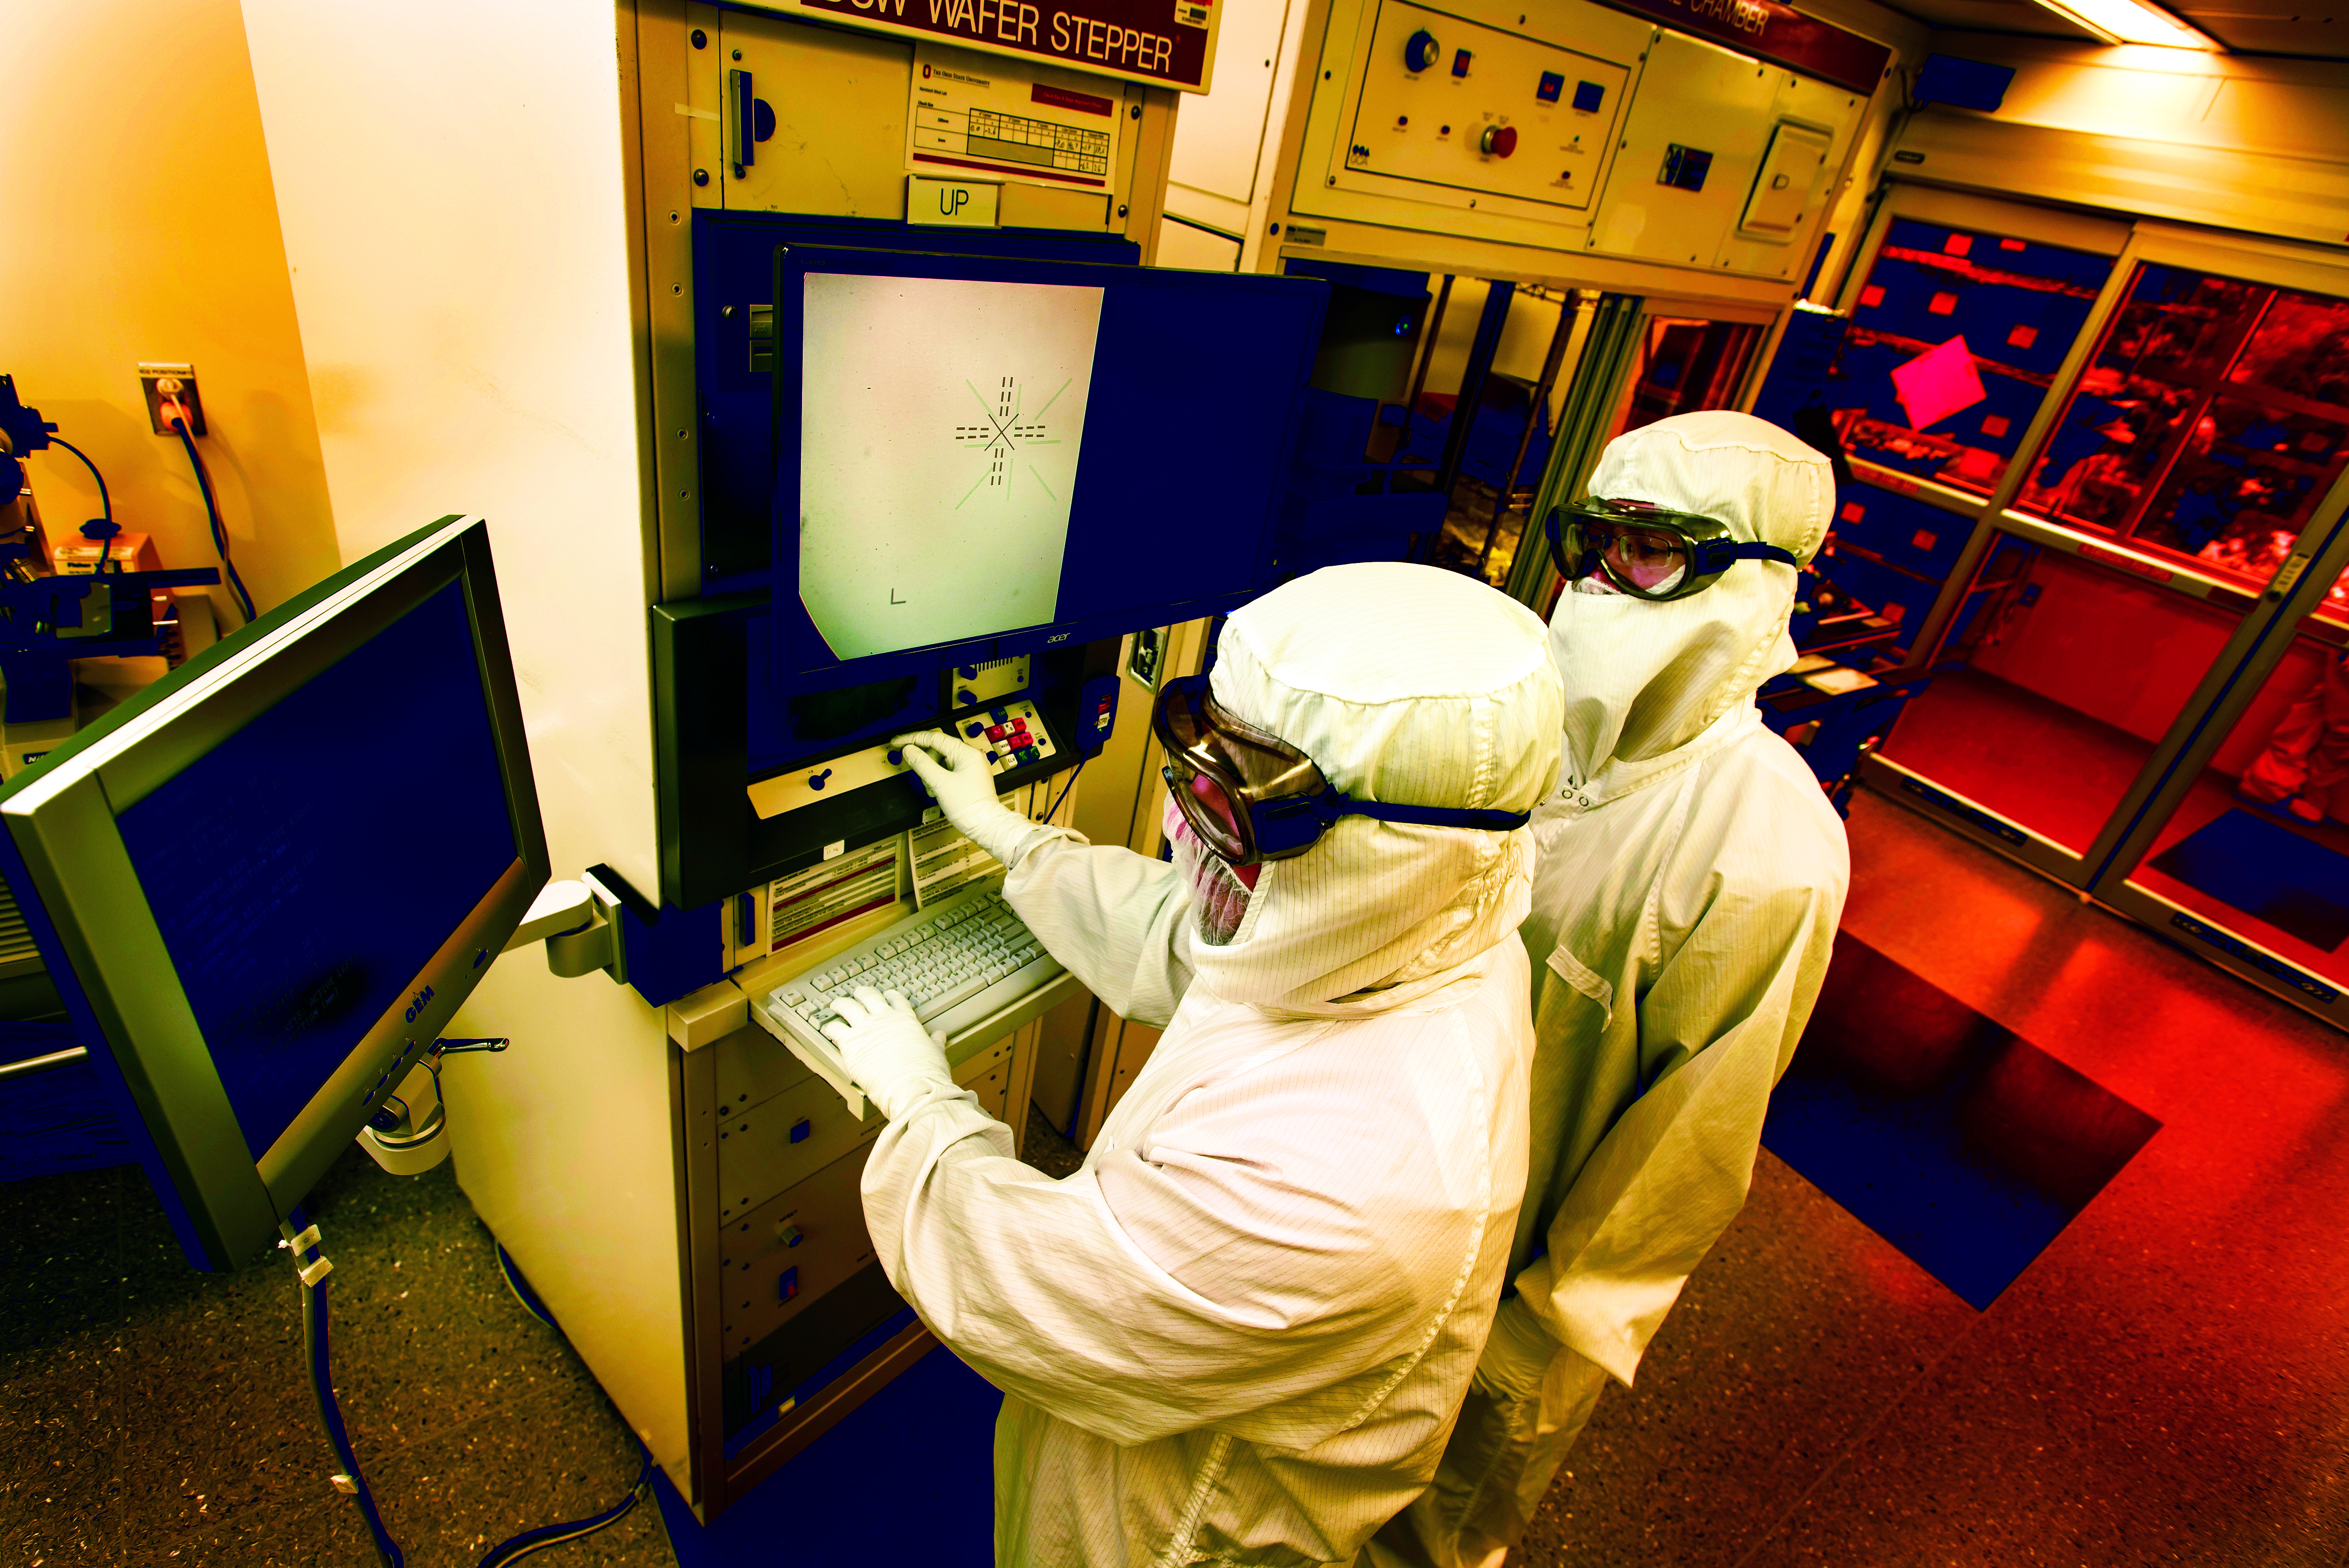 Researchers working in the Nanotech West Lab cleanroom.